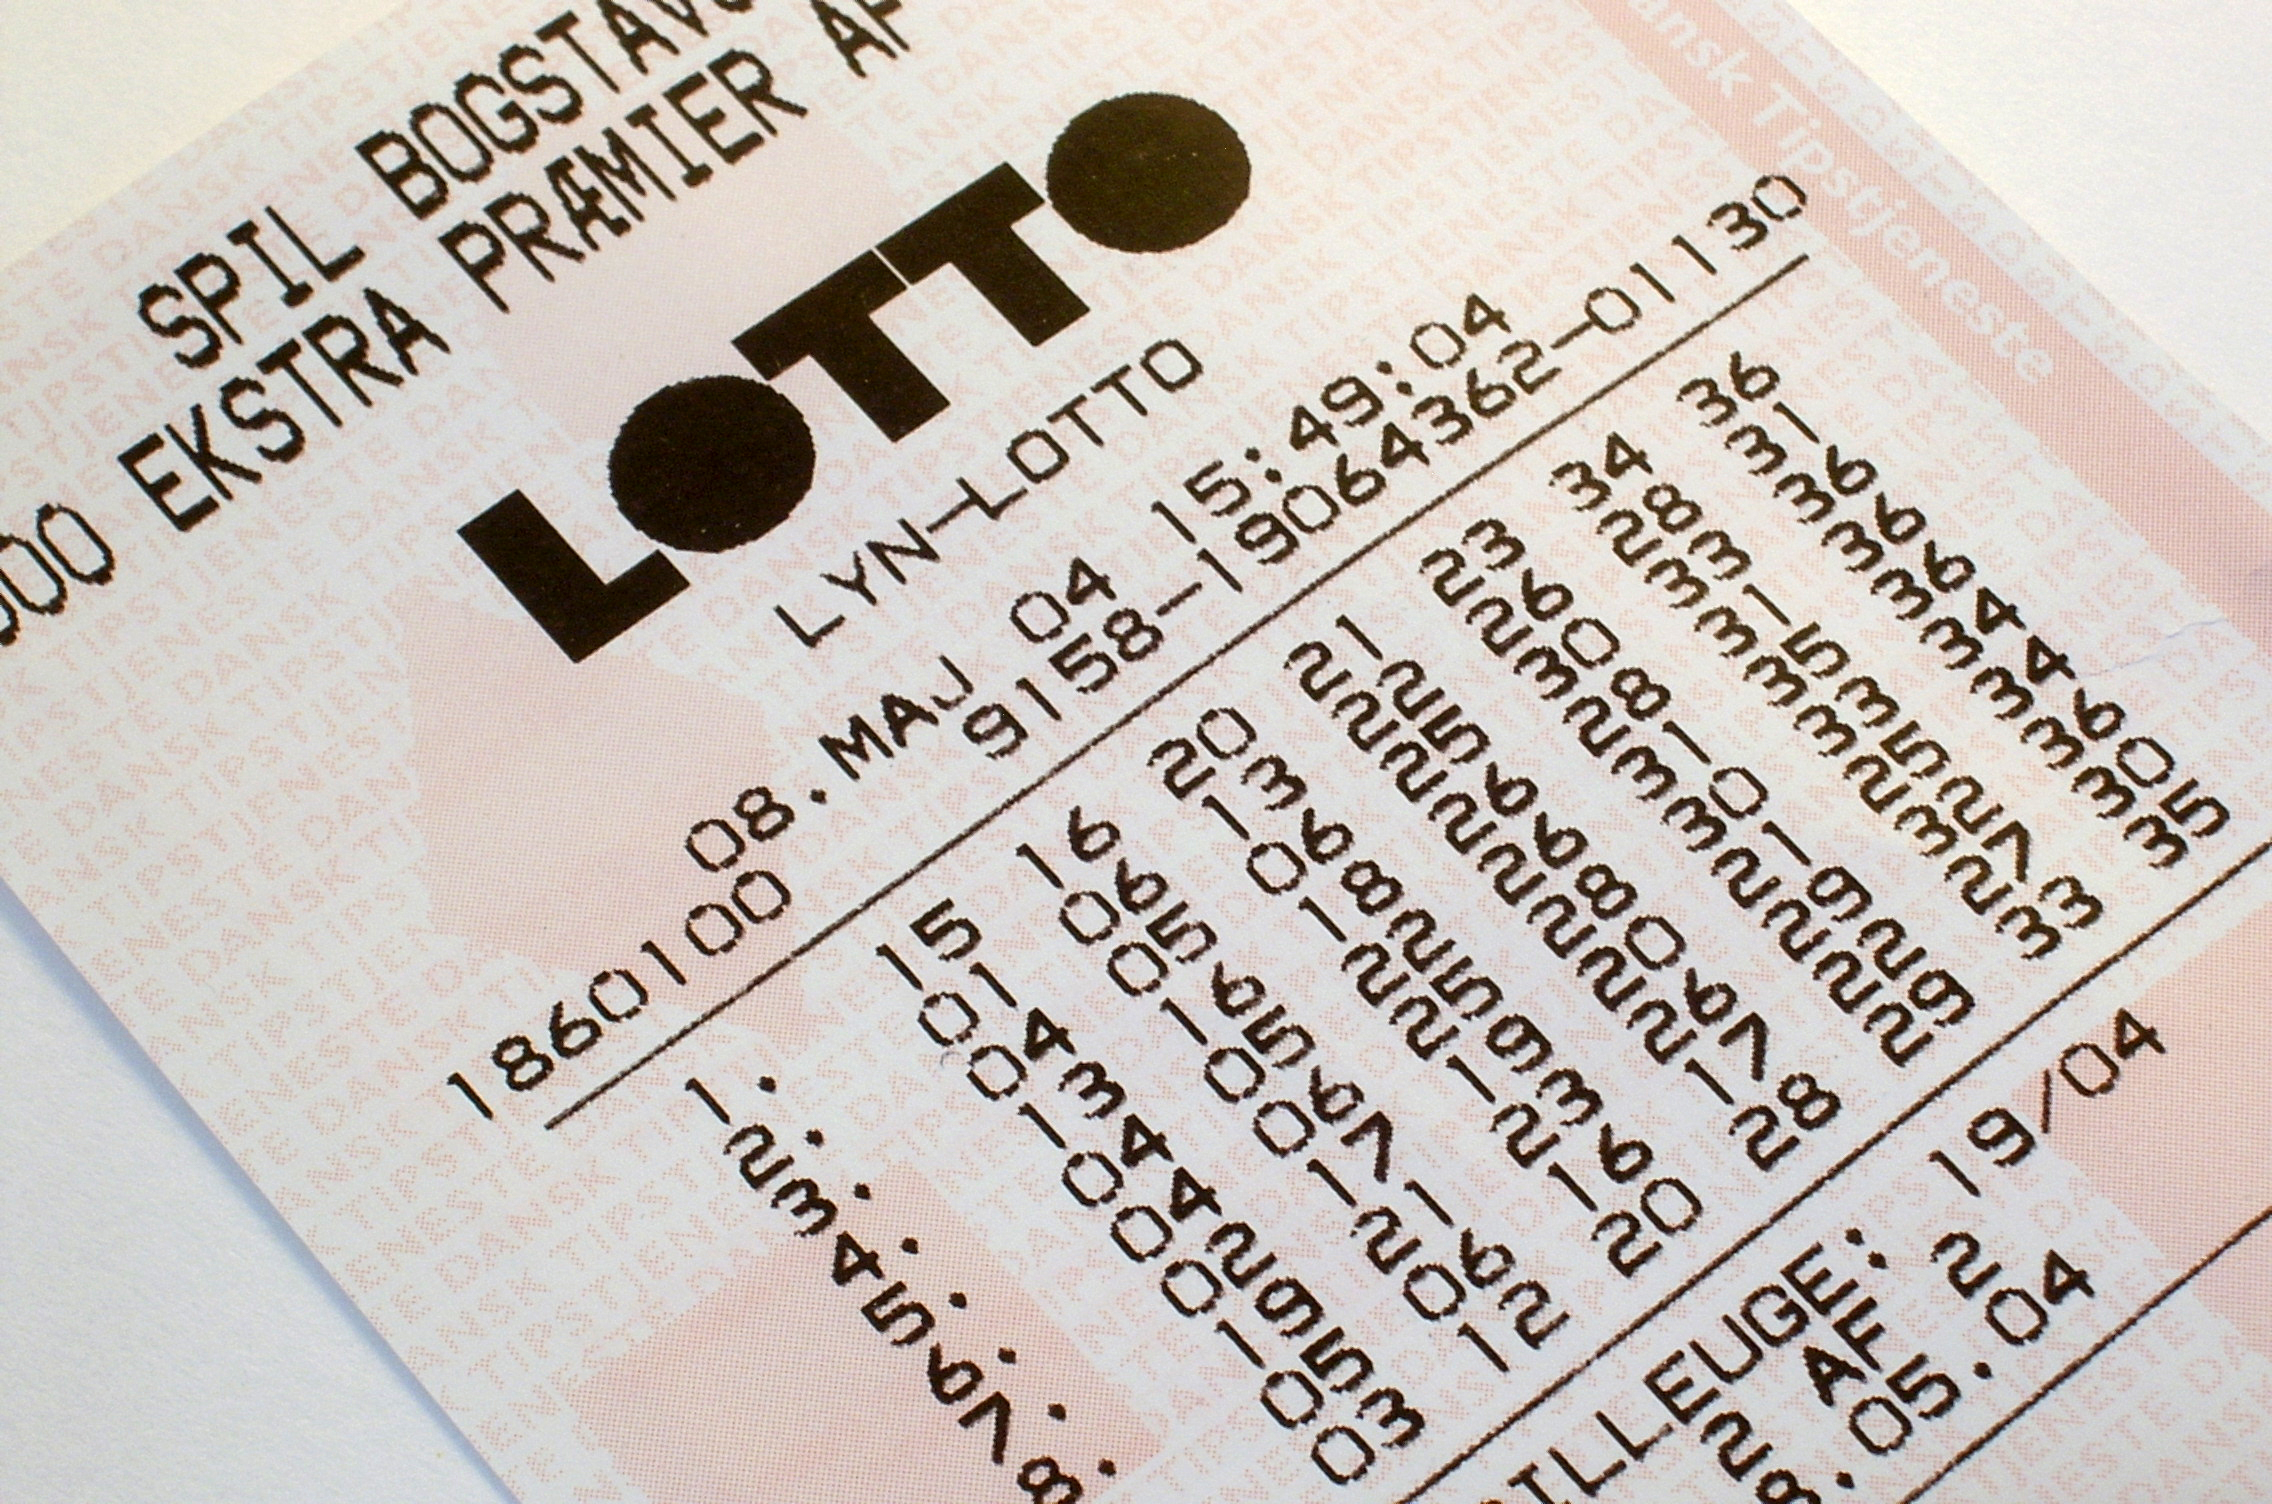 lotto king online